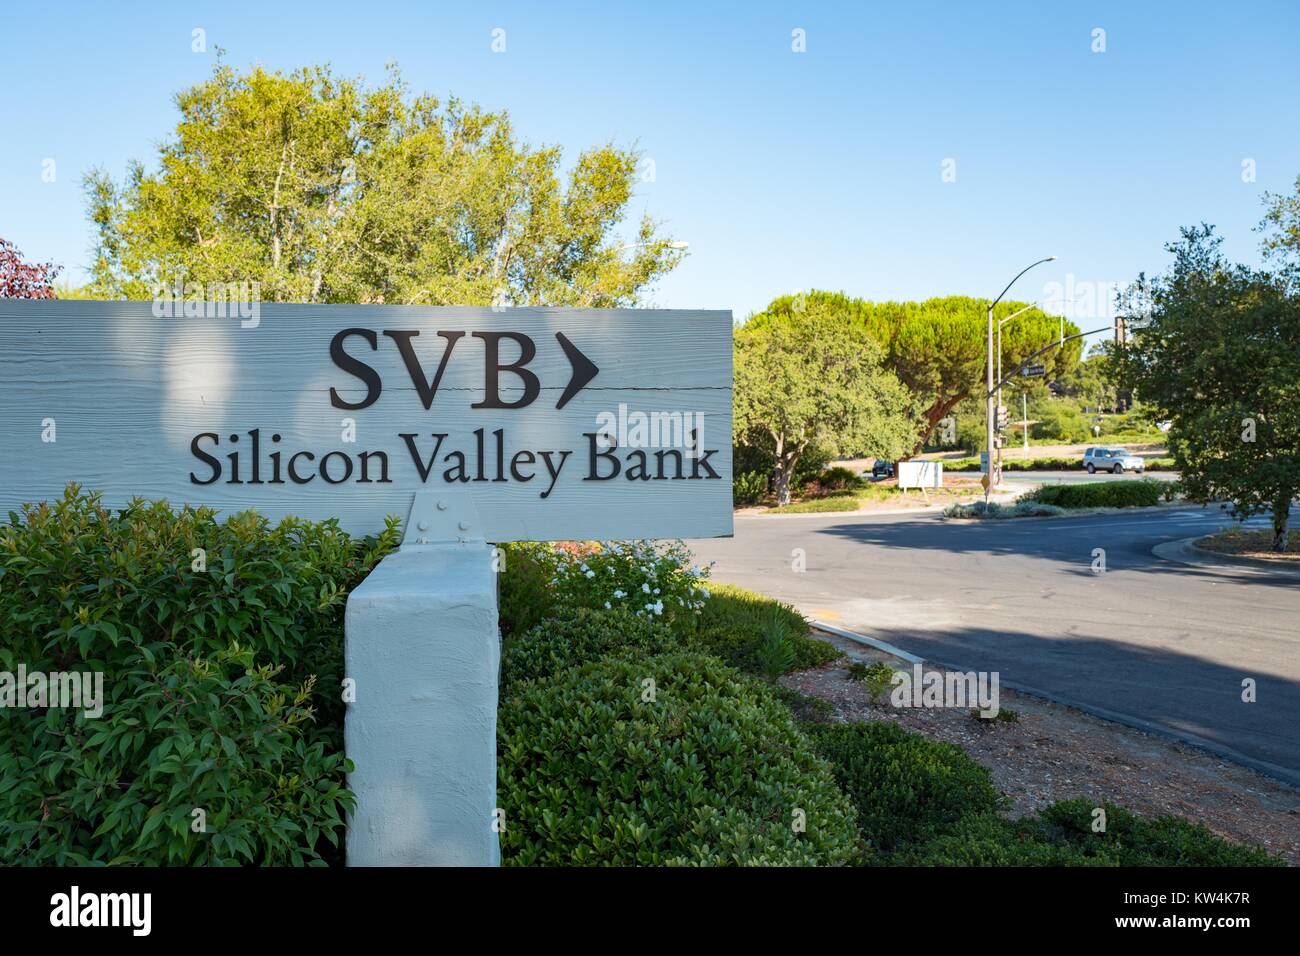 Signage for high-tech commercial bank Silicon Valley Bank, on Sand Hill Road in the Silicon Valley town of Menlo Park, California, August 25, 2016. Stock Photo